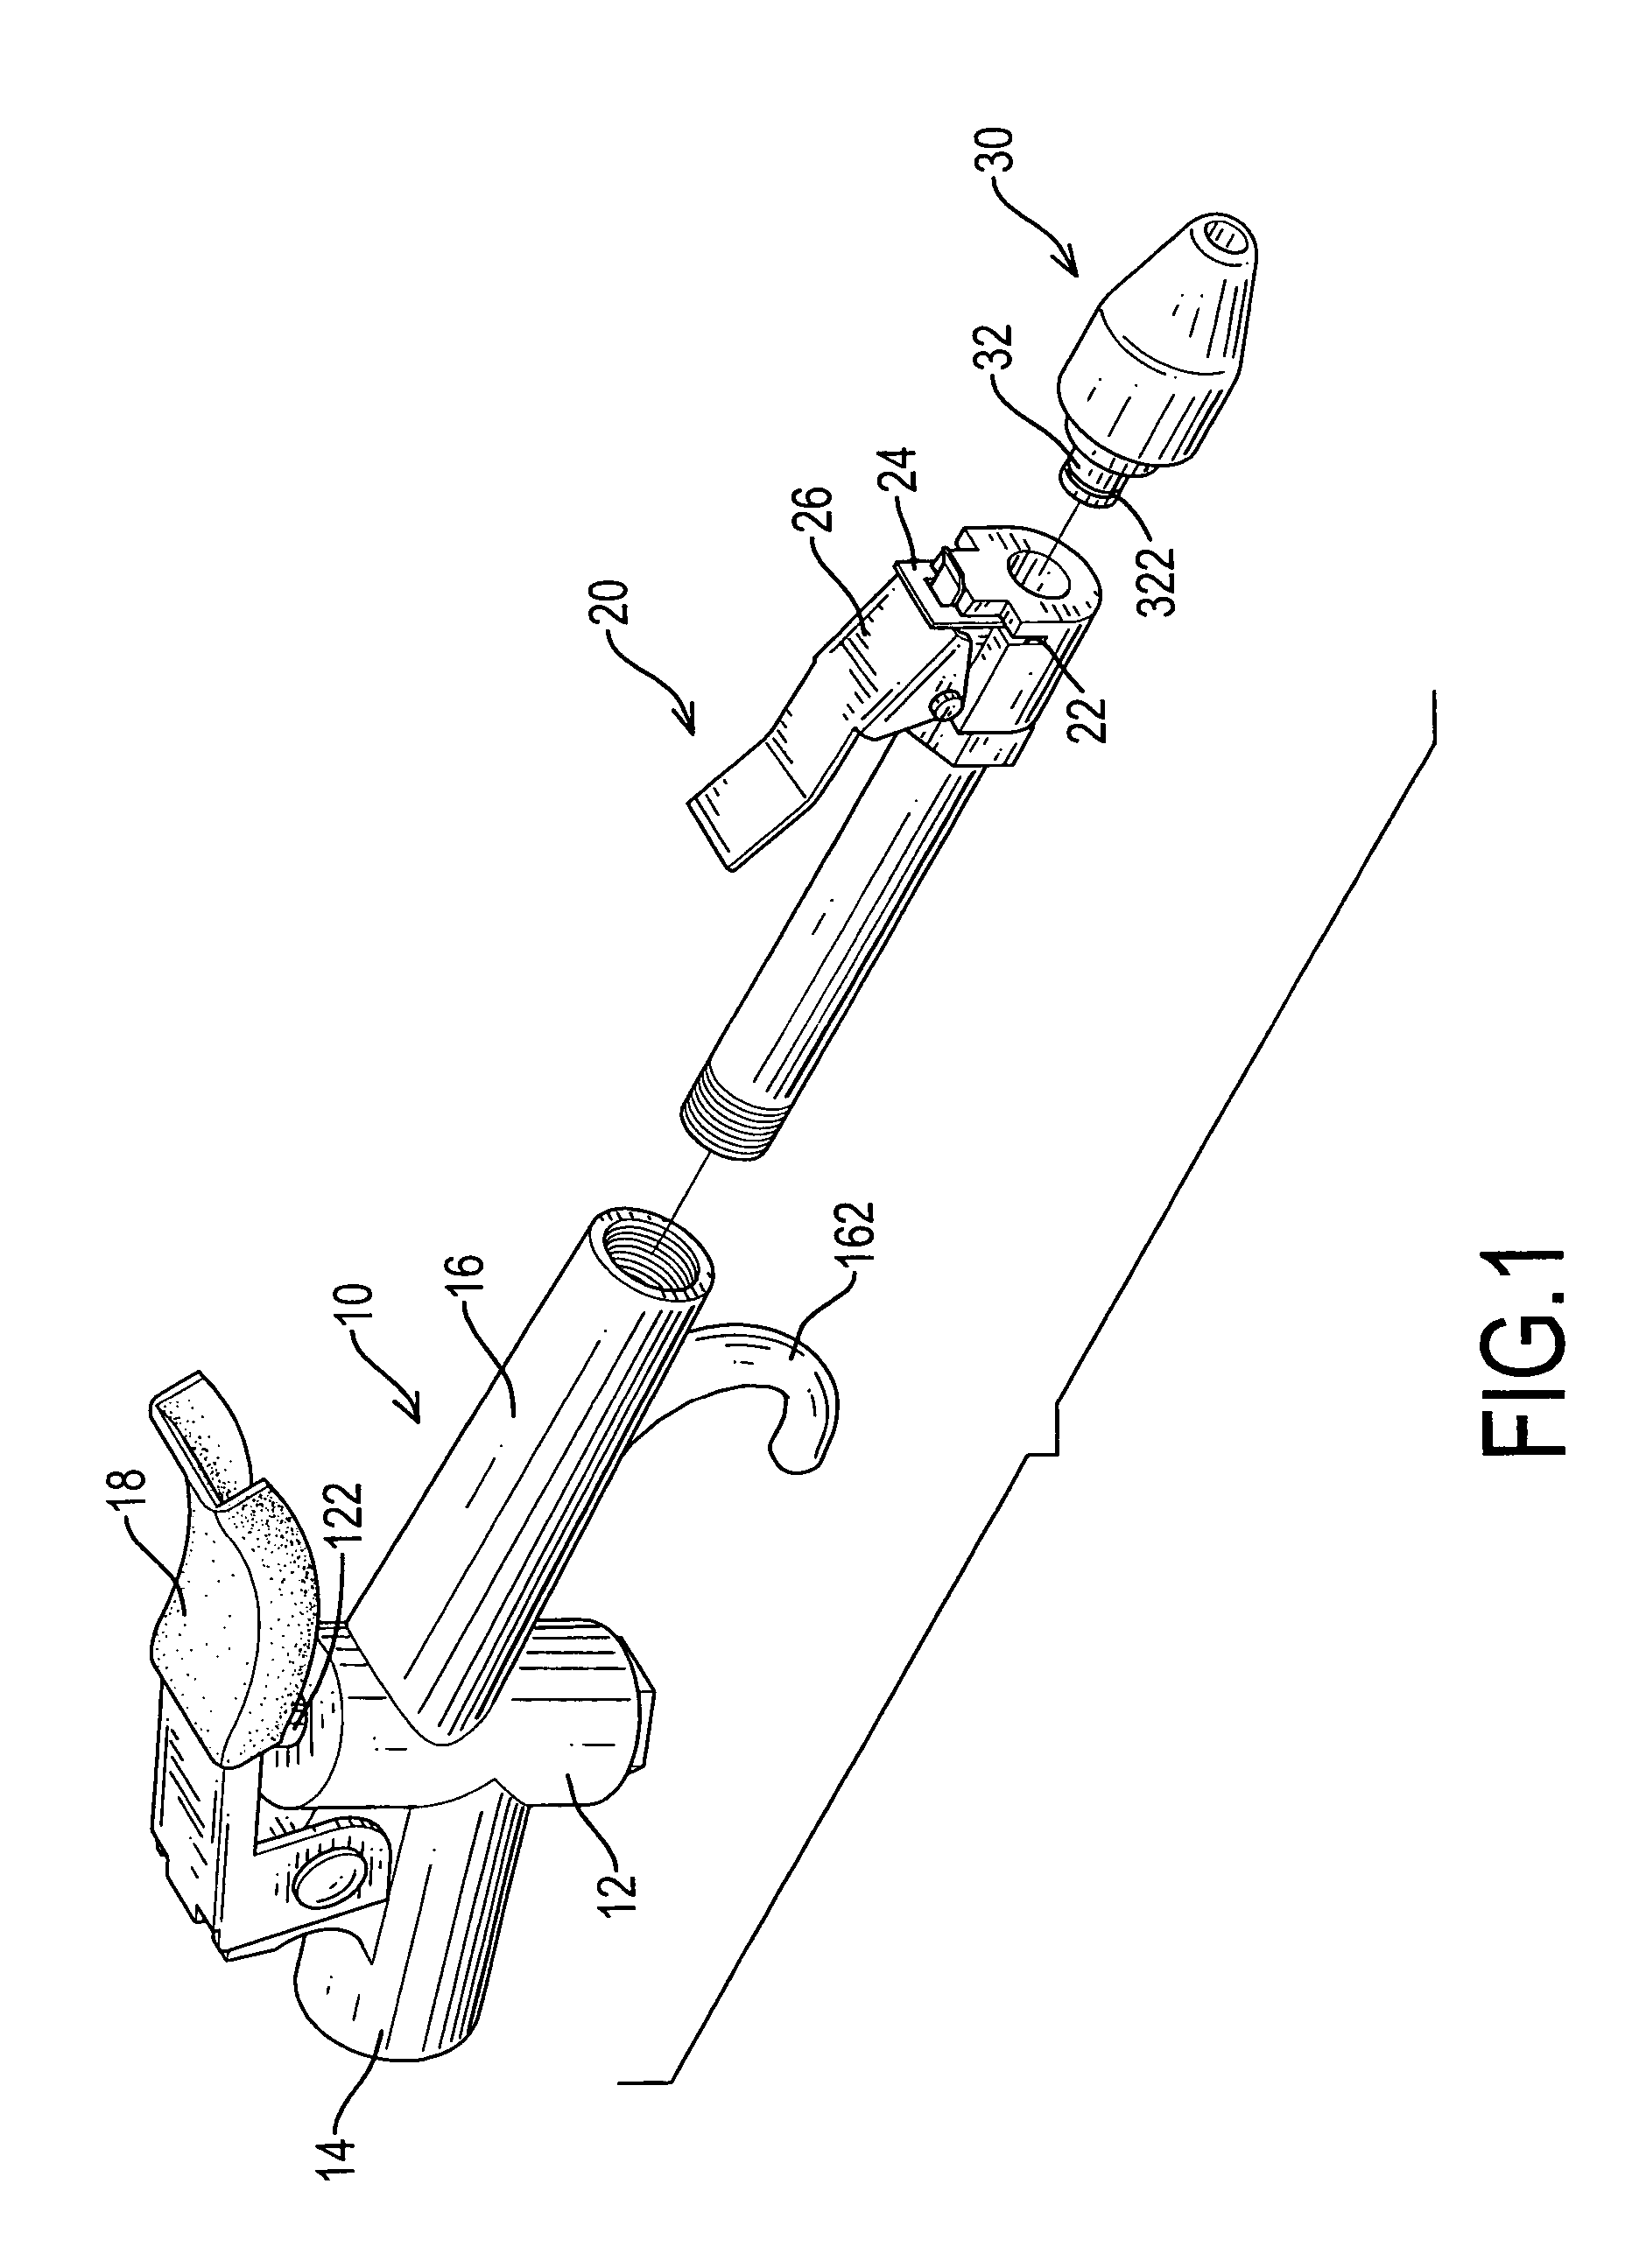 Air gun with a quick-releasing device